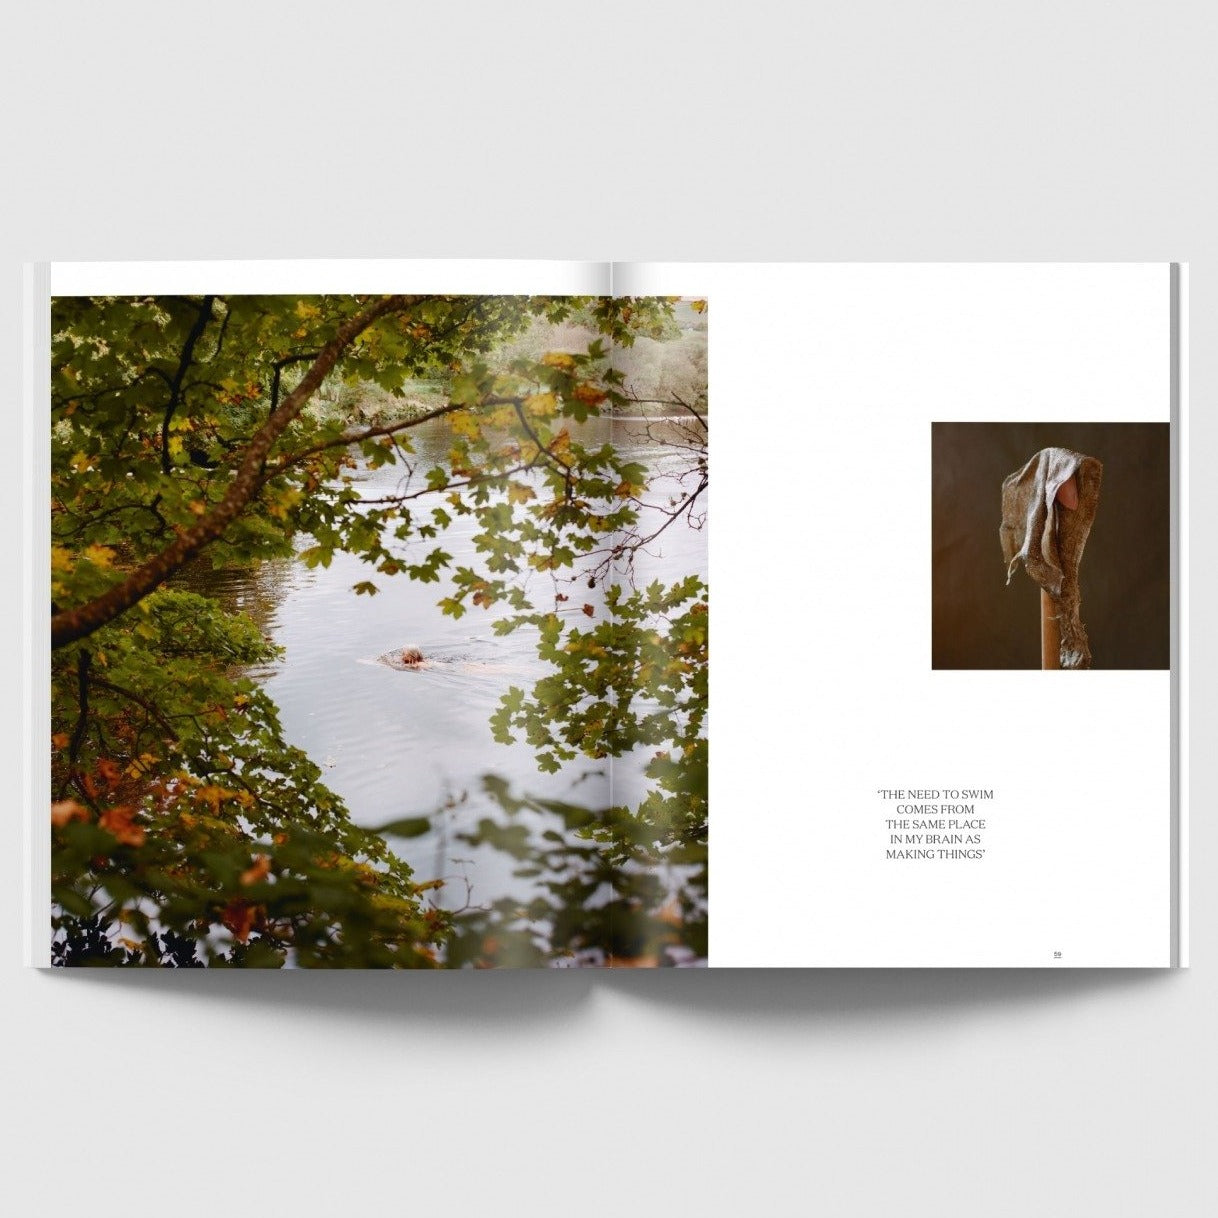 Issue 15: Natural